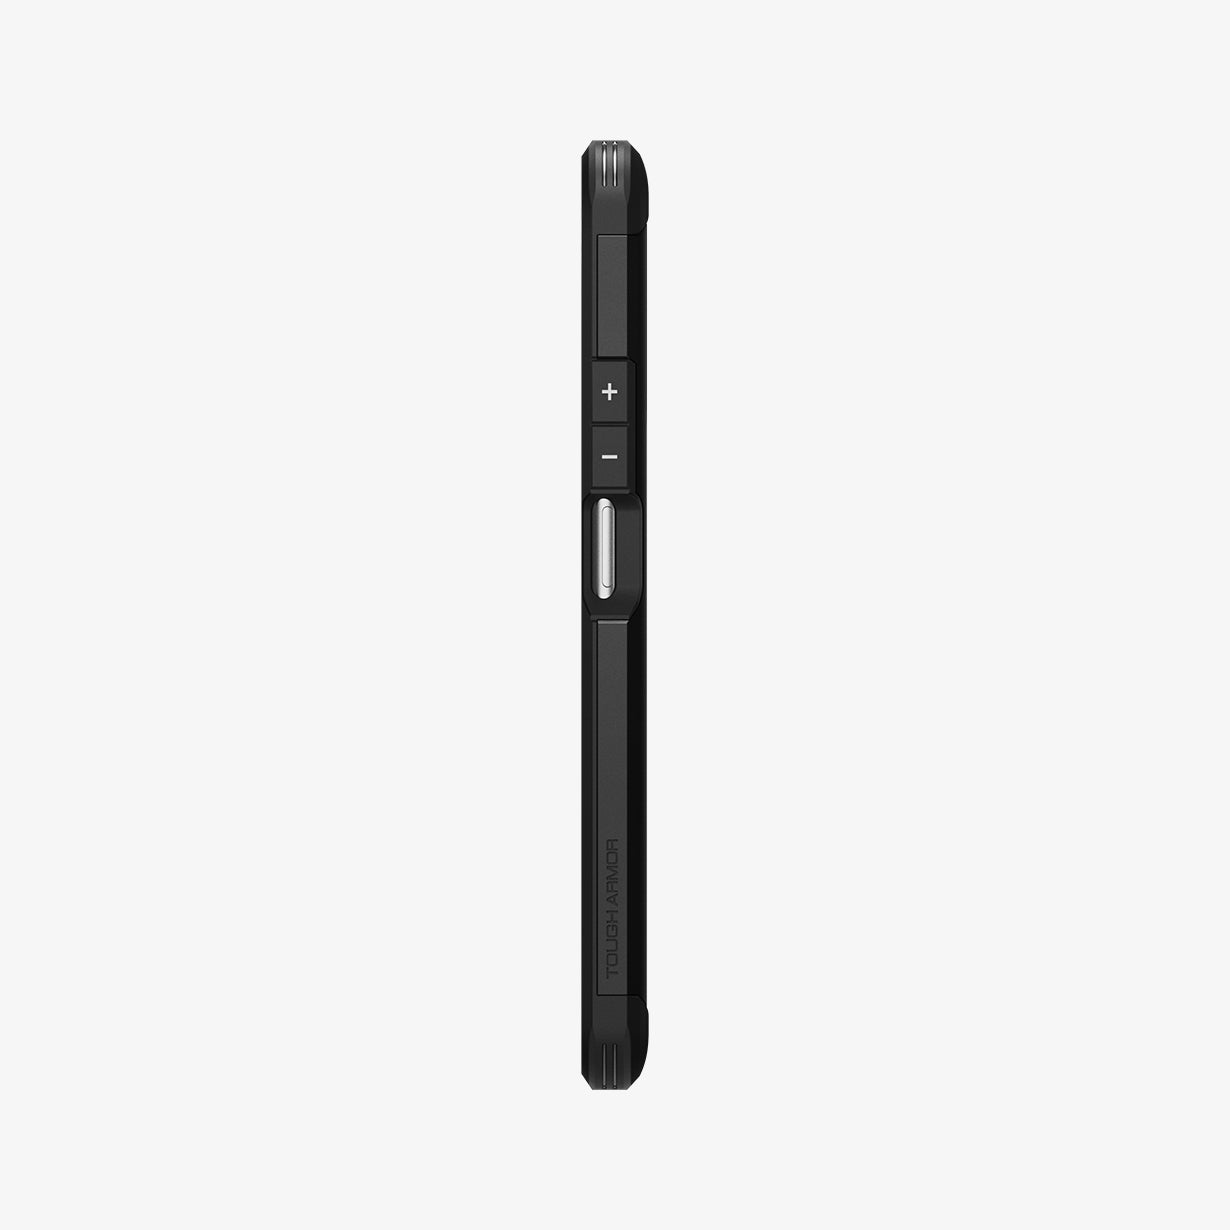 ACS03863 - Xiaomi 11T Pro Tough Armor Case in Black showing the side